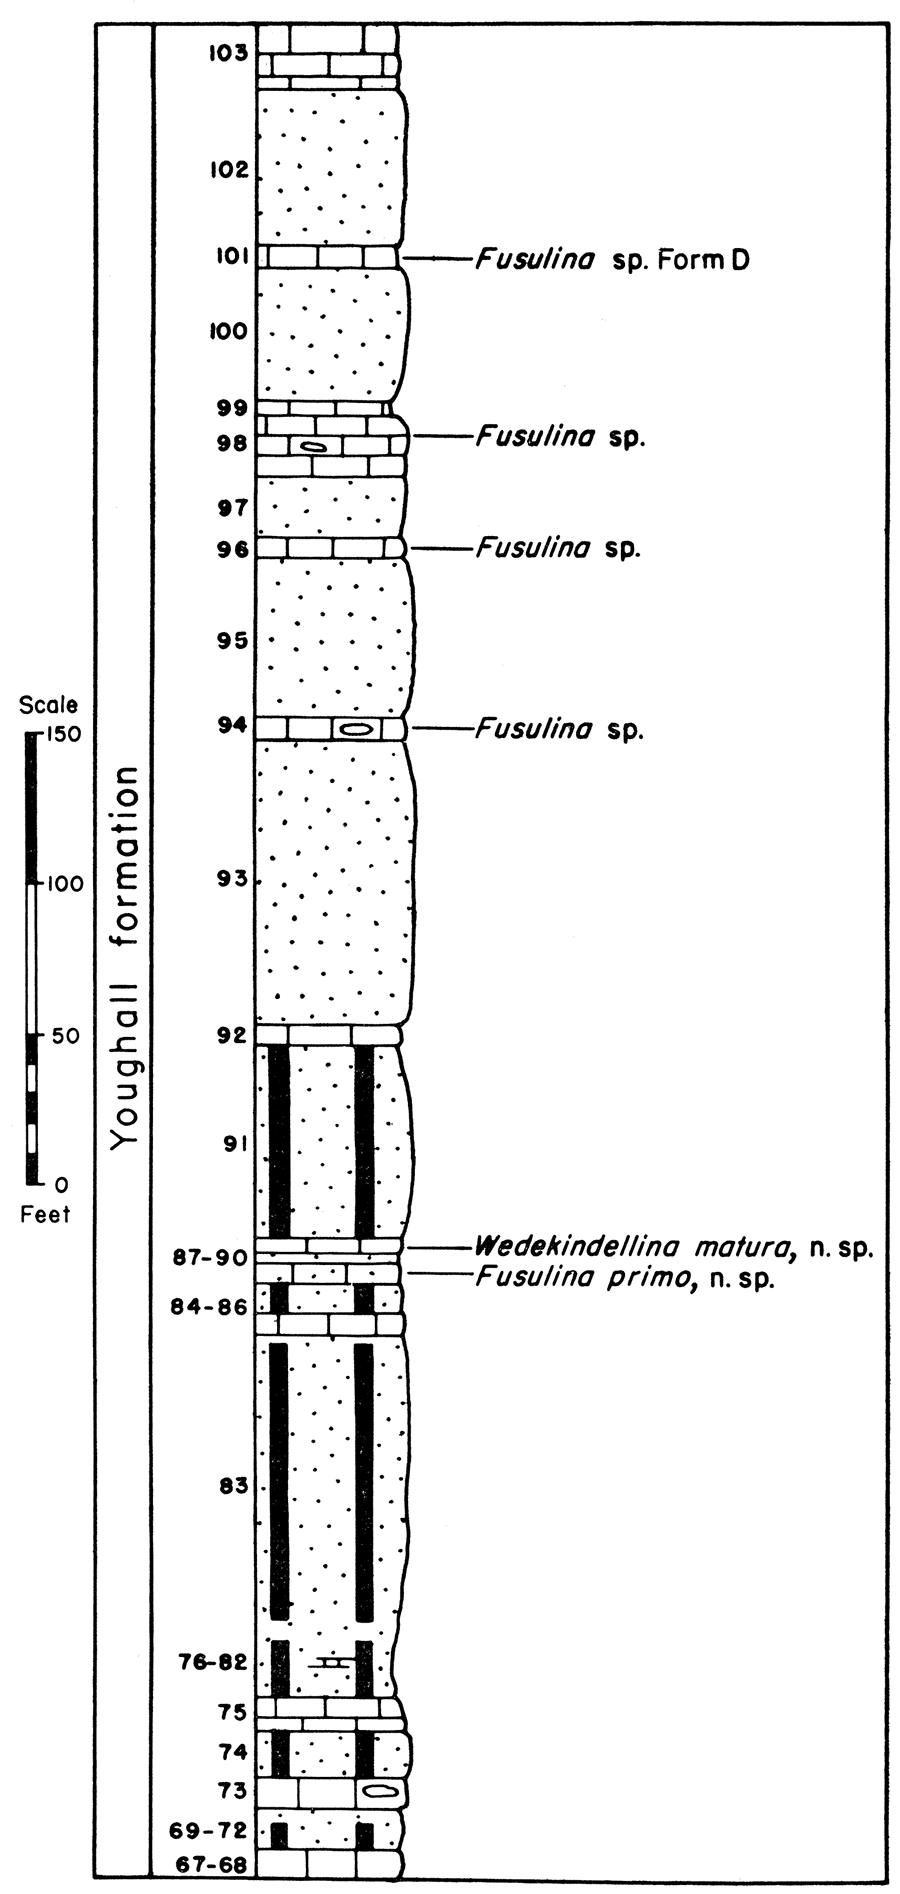 Diagram and fusulinid faunas of the Youghall formation, Section P-17, Hell's Canyon.